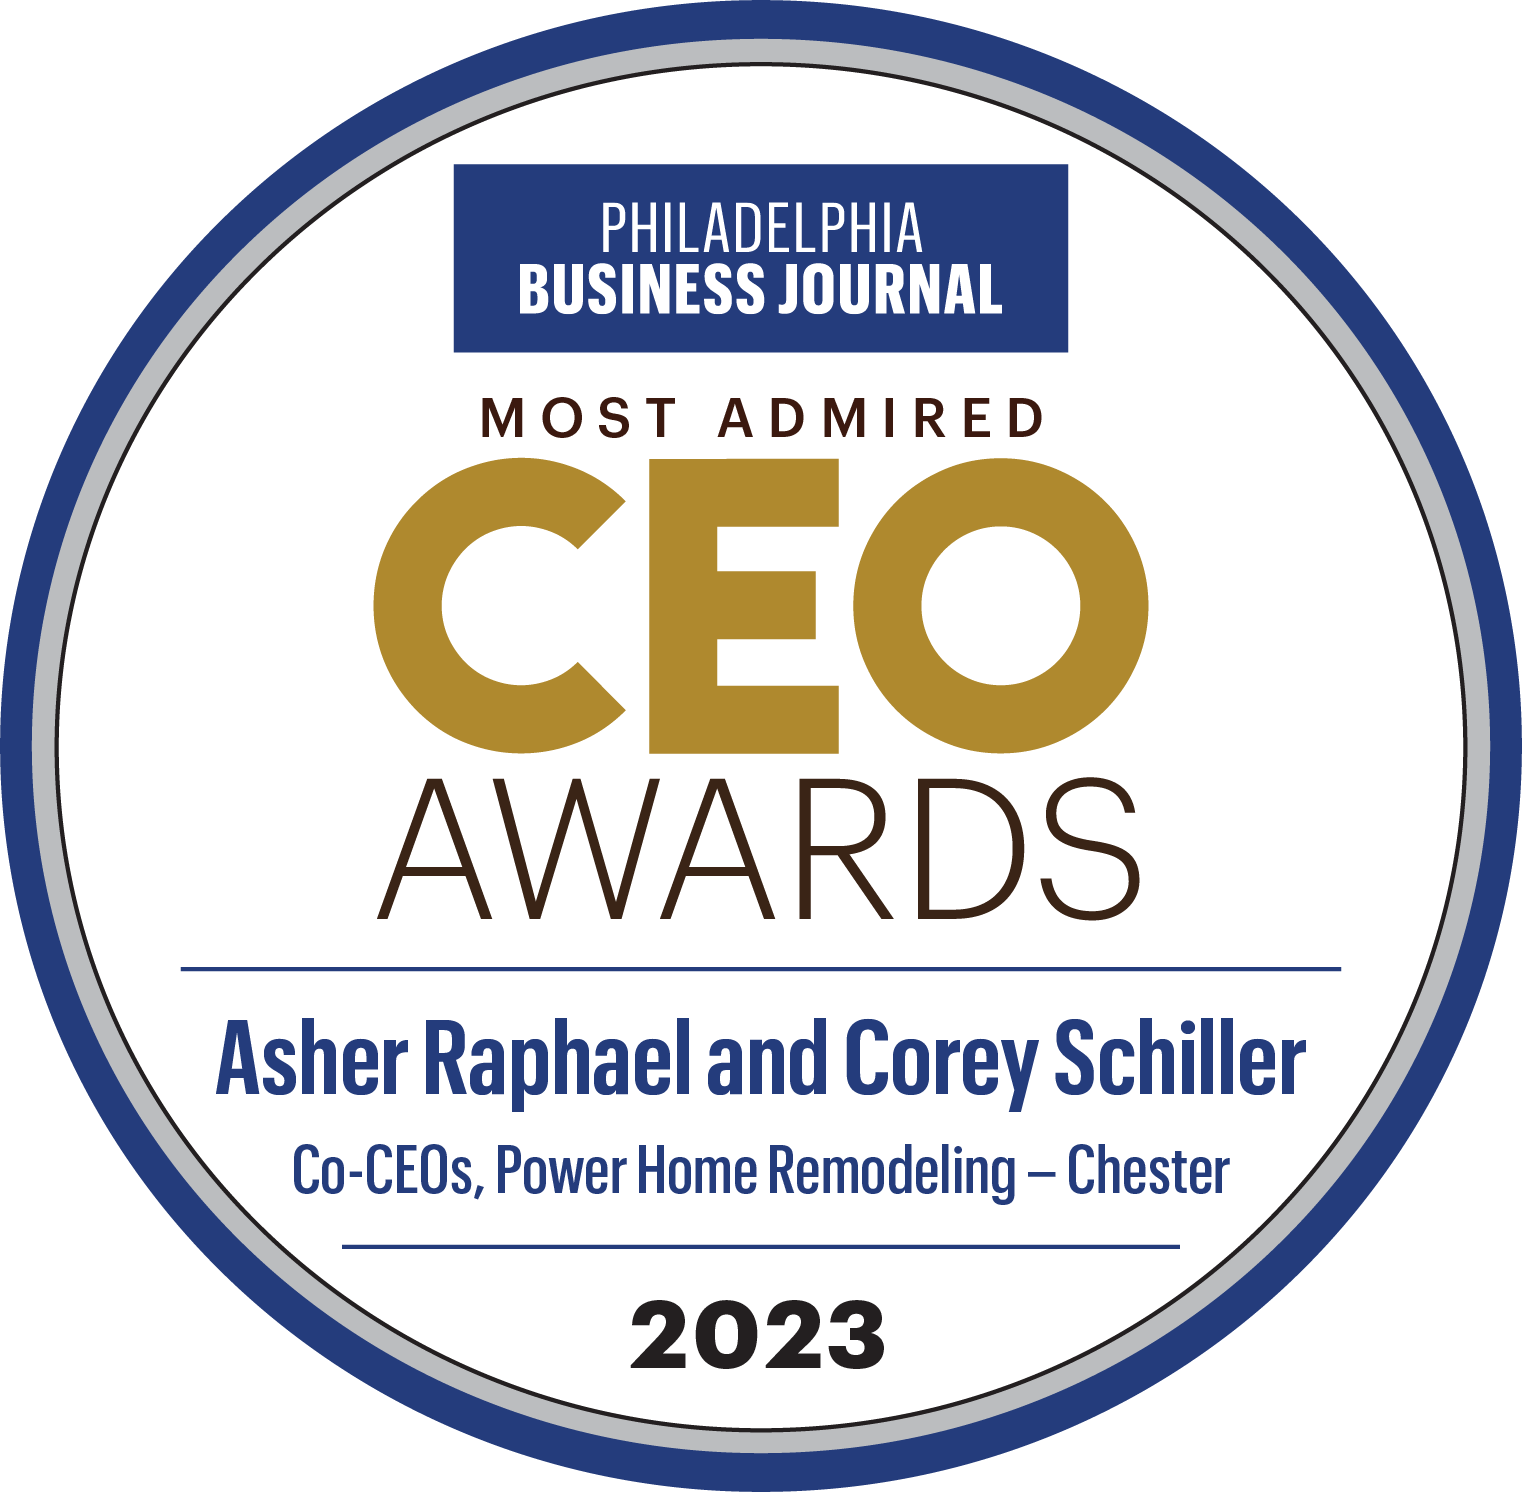 2023 Most Admired CEO Awards